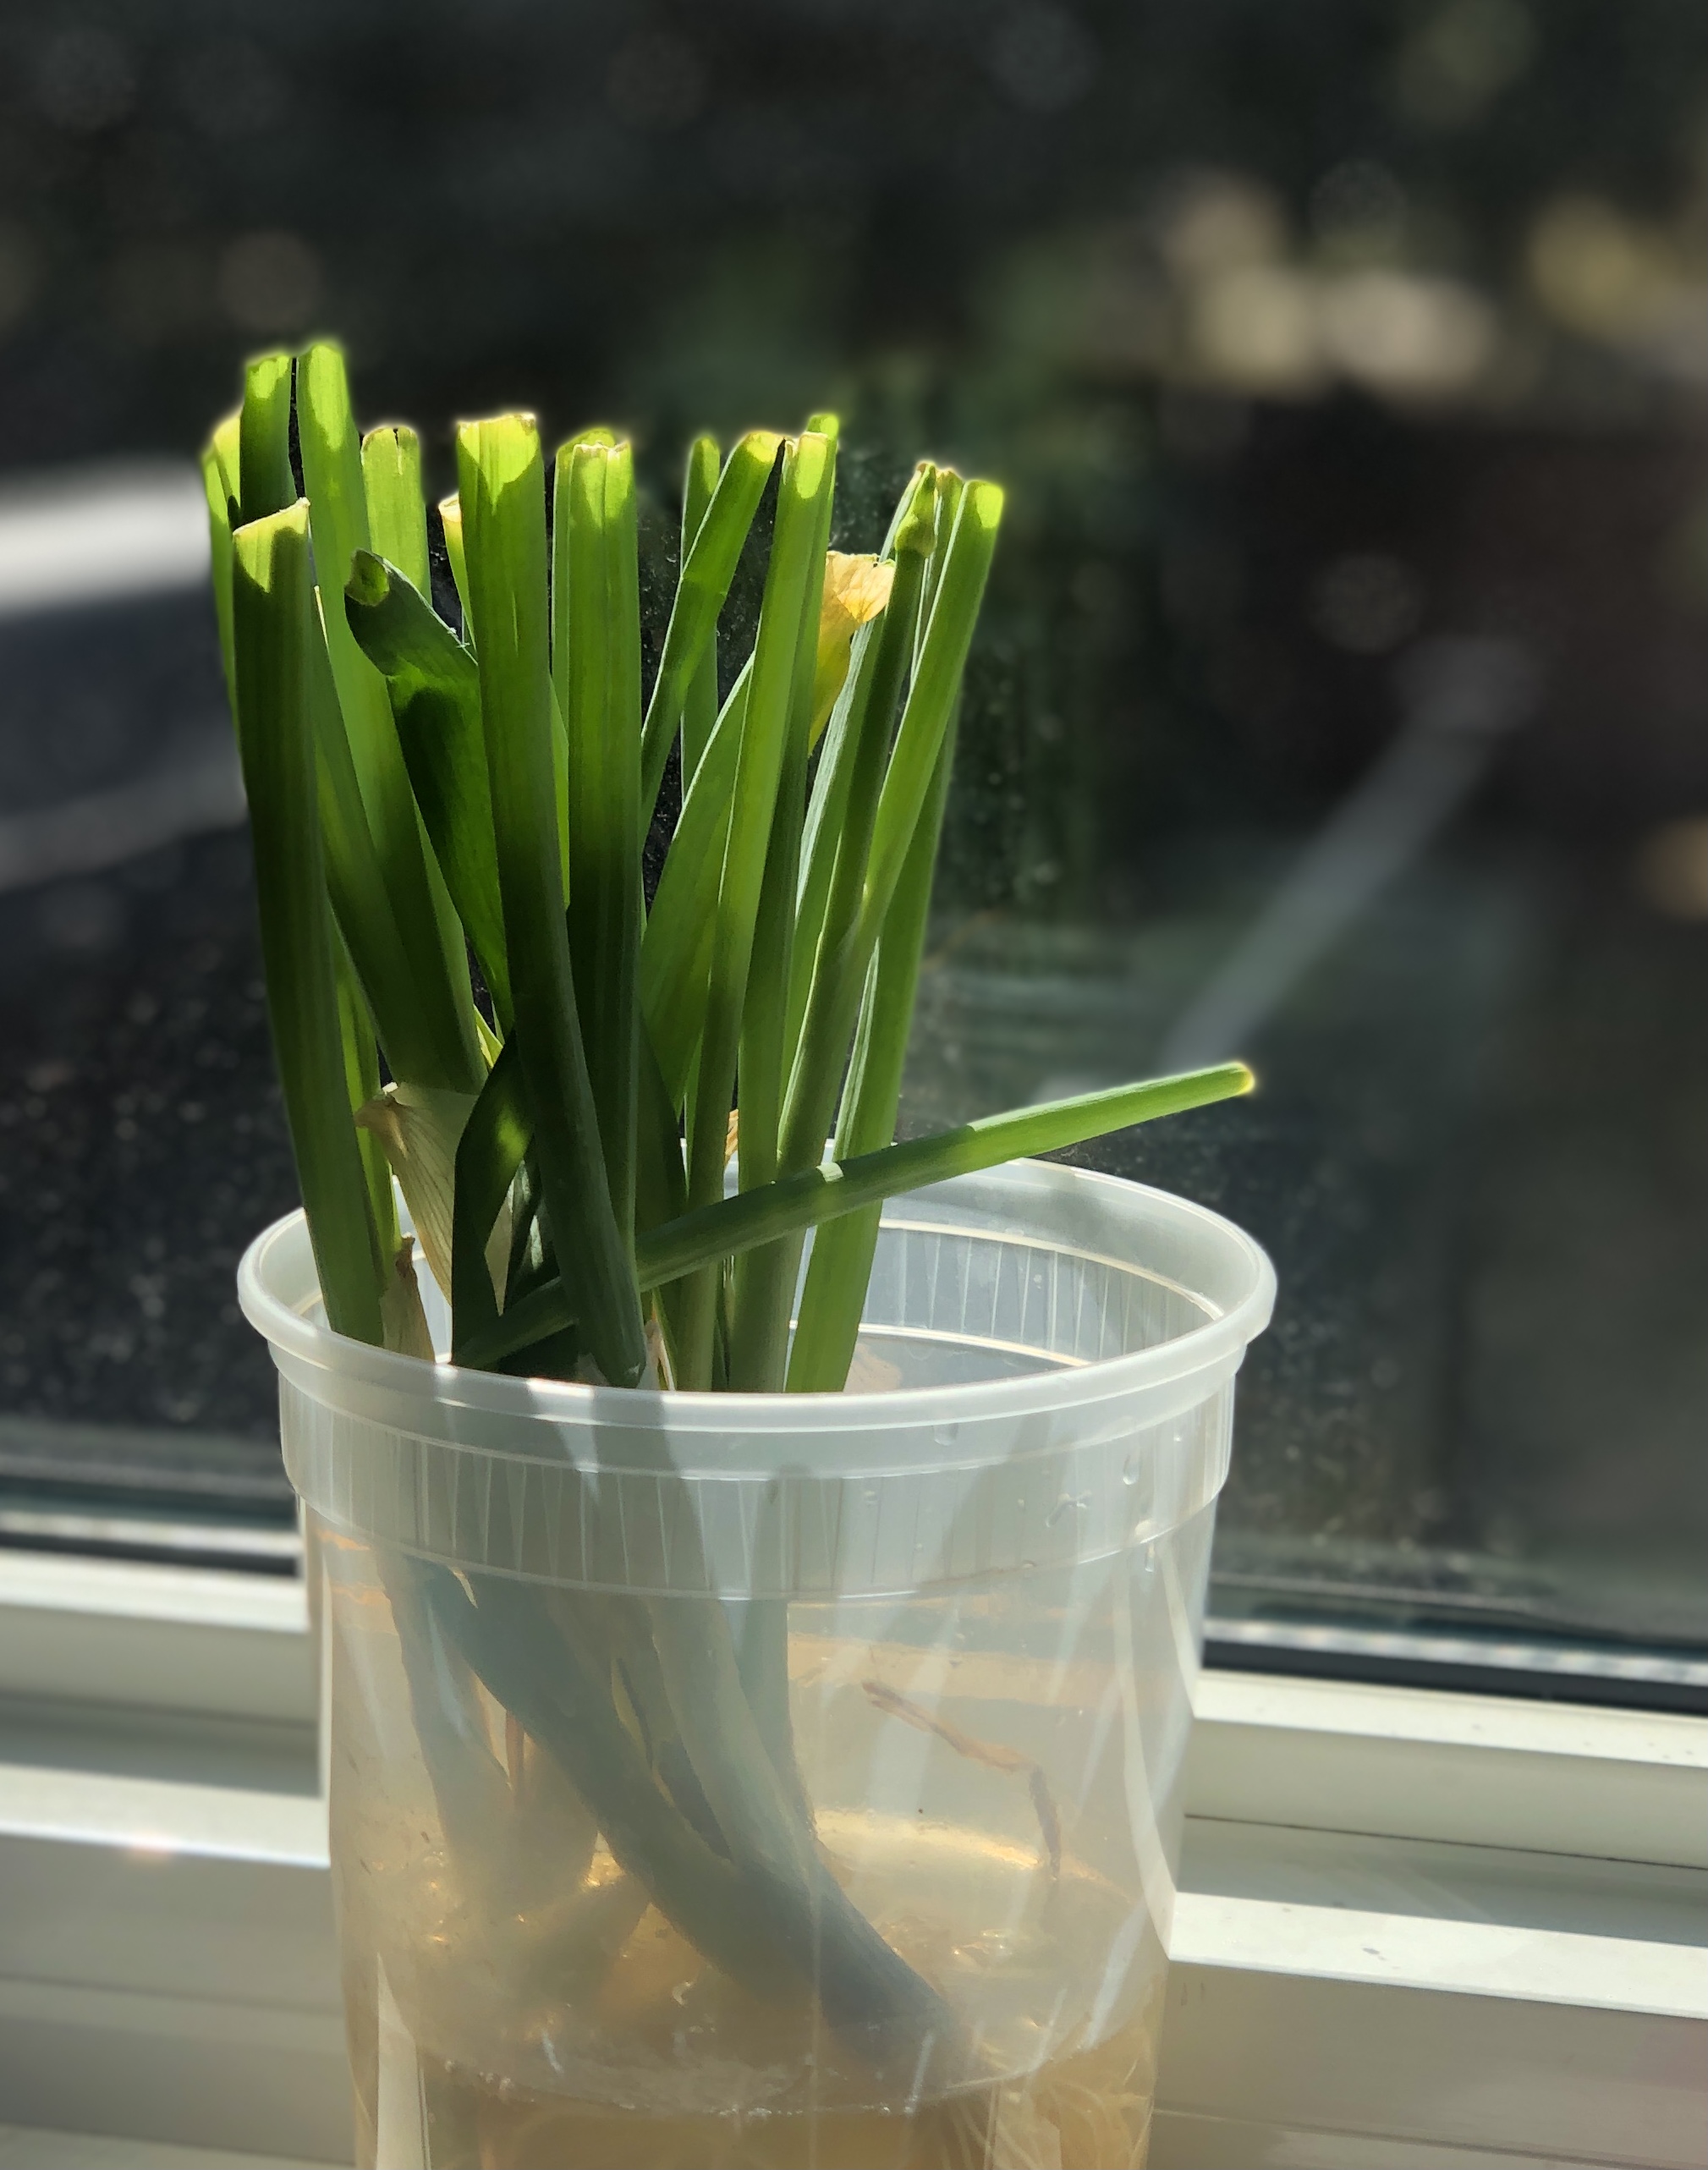 Green onions growing in a plastic container on the window sill.